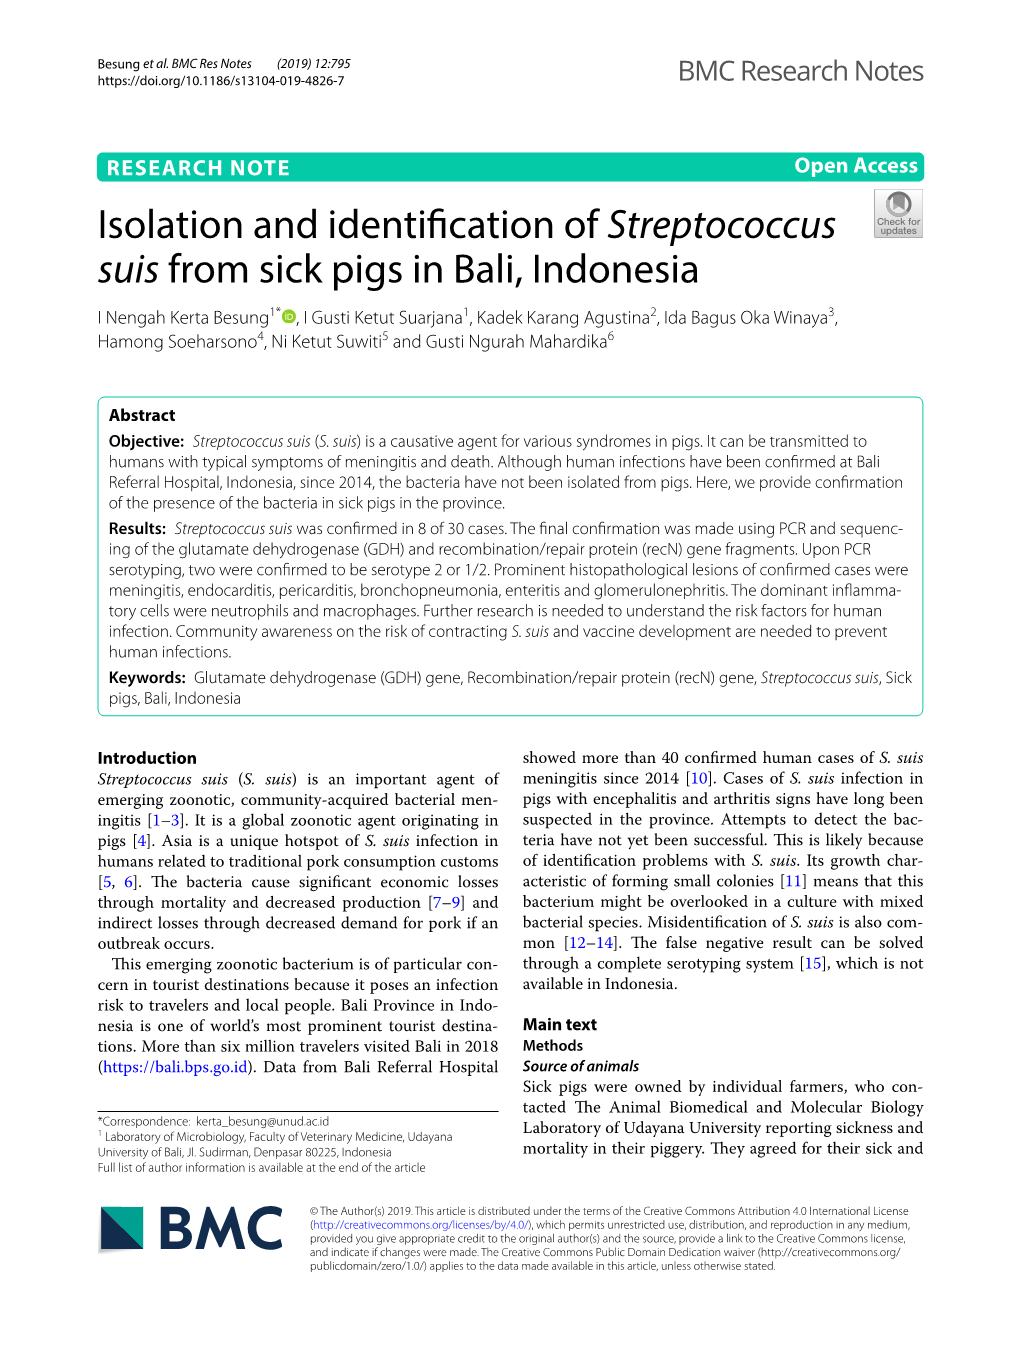 Isolation and Identification of Streptococcus Suis from Sick Pigs In